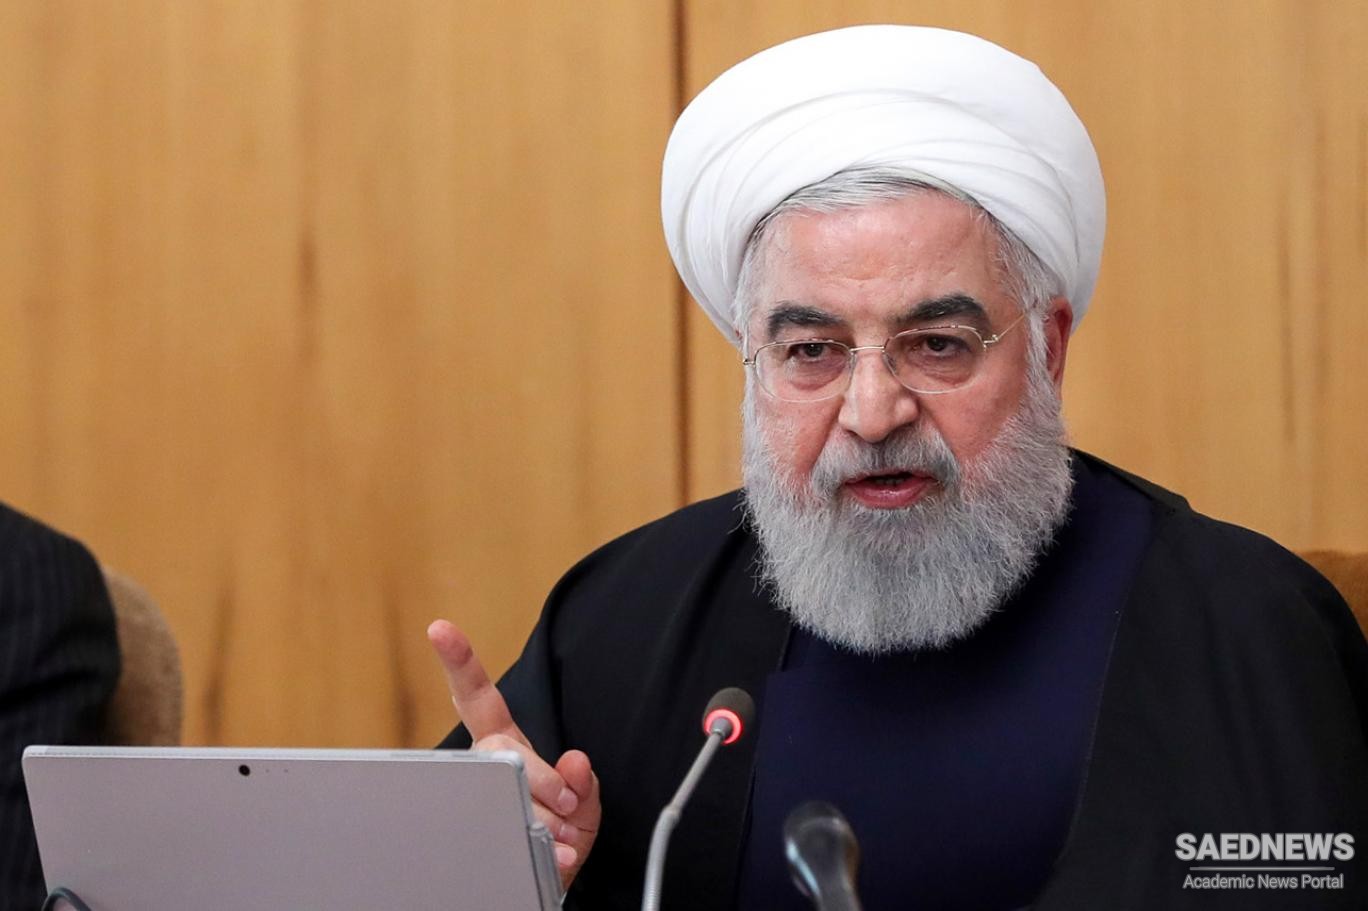 President Hassan Rouhani: Corona Restrictions Had Positive Results